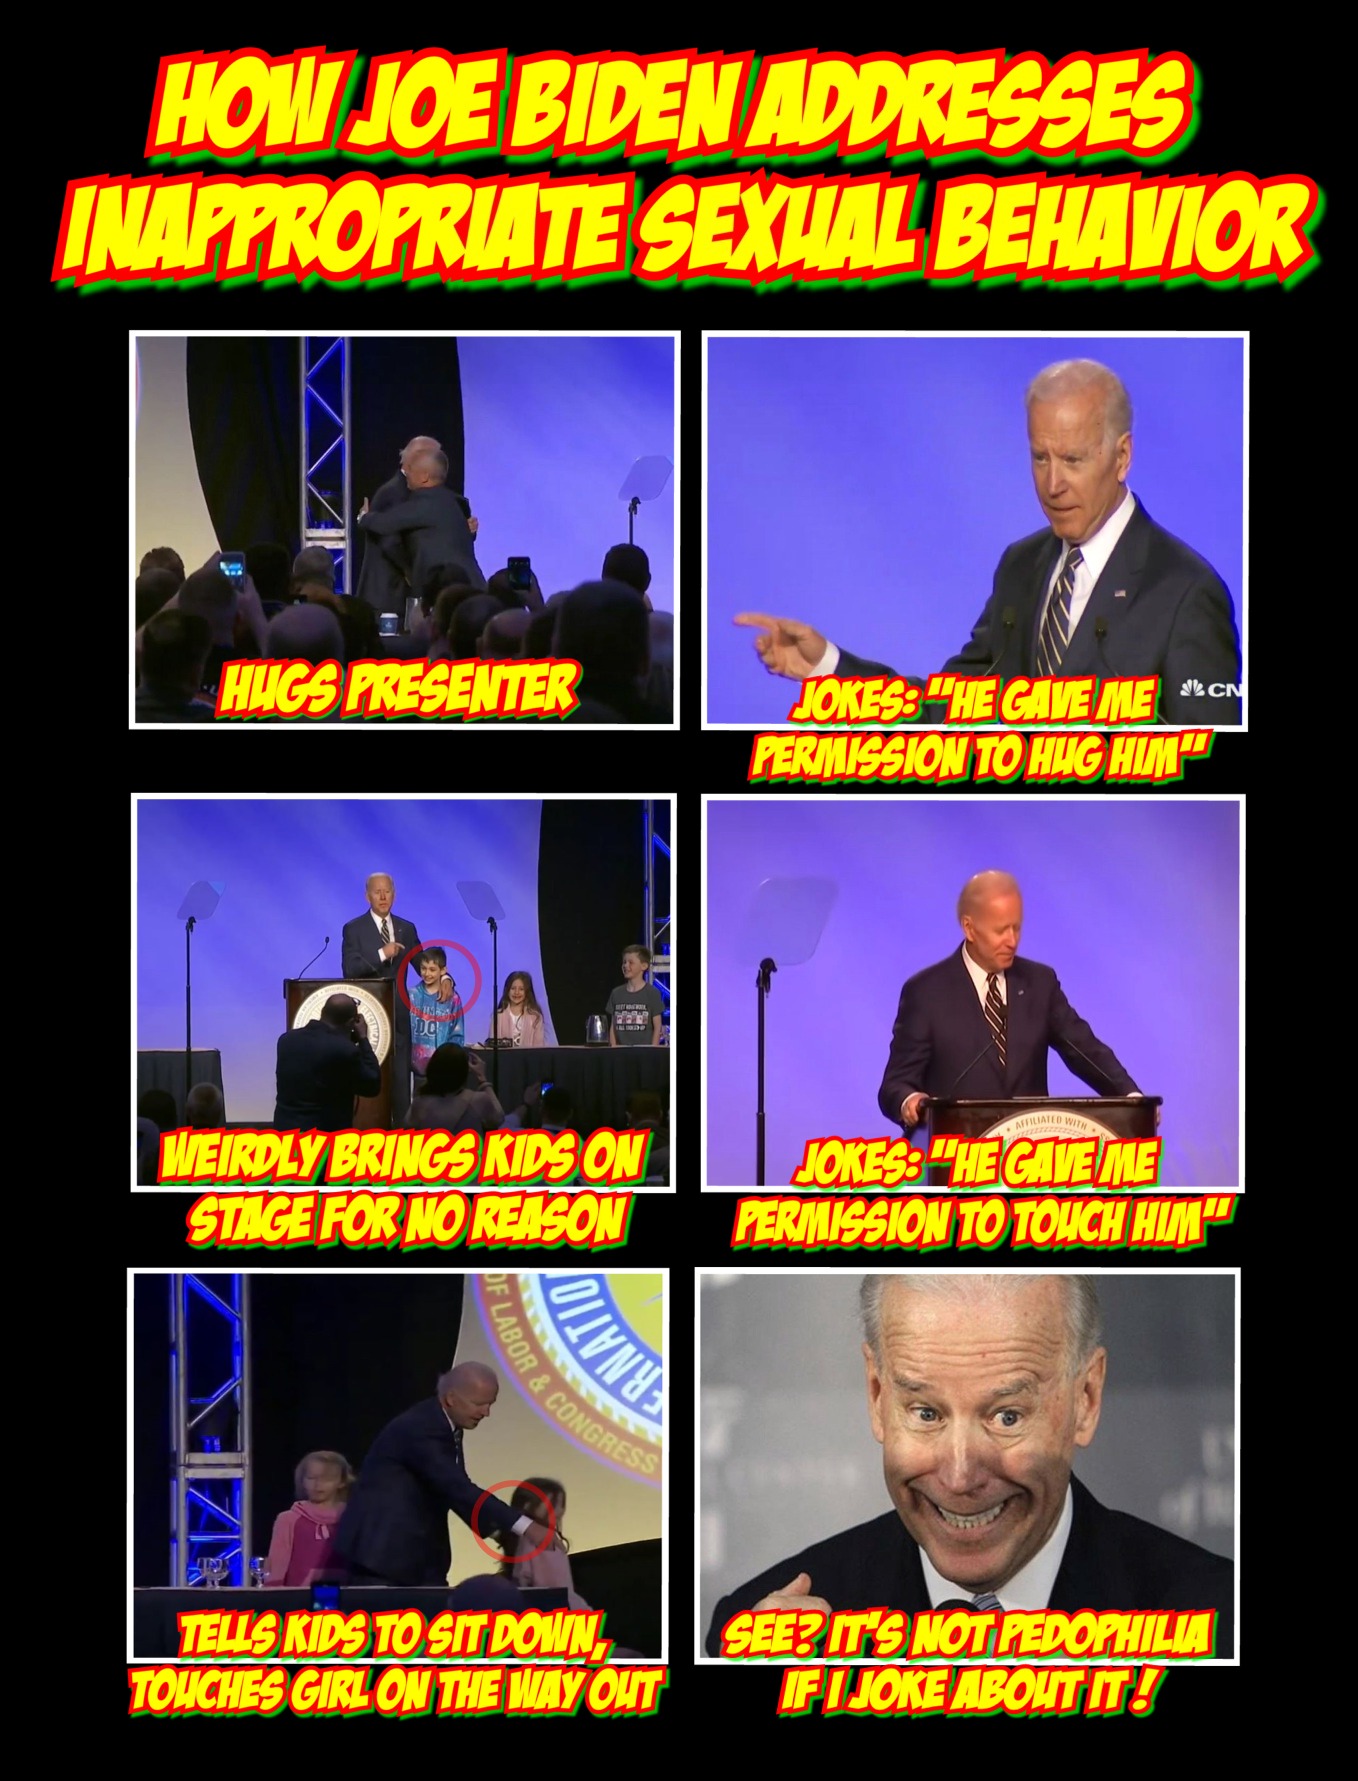 news - How Joe Biden Addresses Inappropriate Sexual Behavior Hugs Presenter Jokes "He Gave Me Mod Permission To Highlan" Weirdly Brings Kids On Stage For No Reason Jokes "He Gavene Permission To Tonich Hunt" Tells Kids To Sit Down, Touches Girl On The Mor